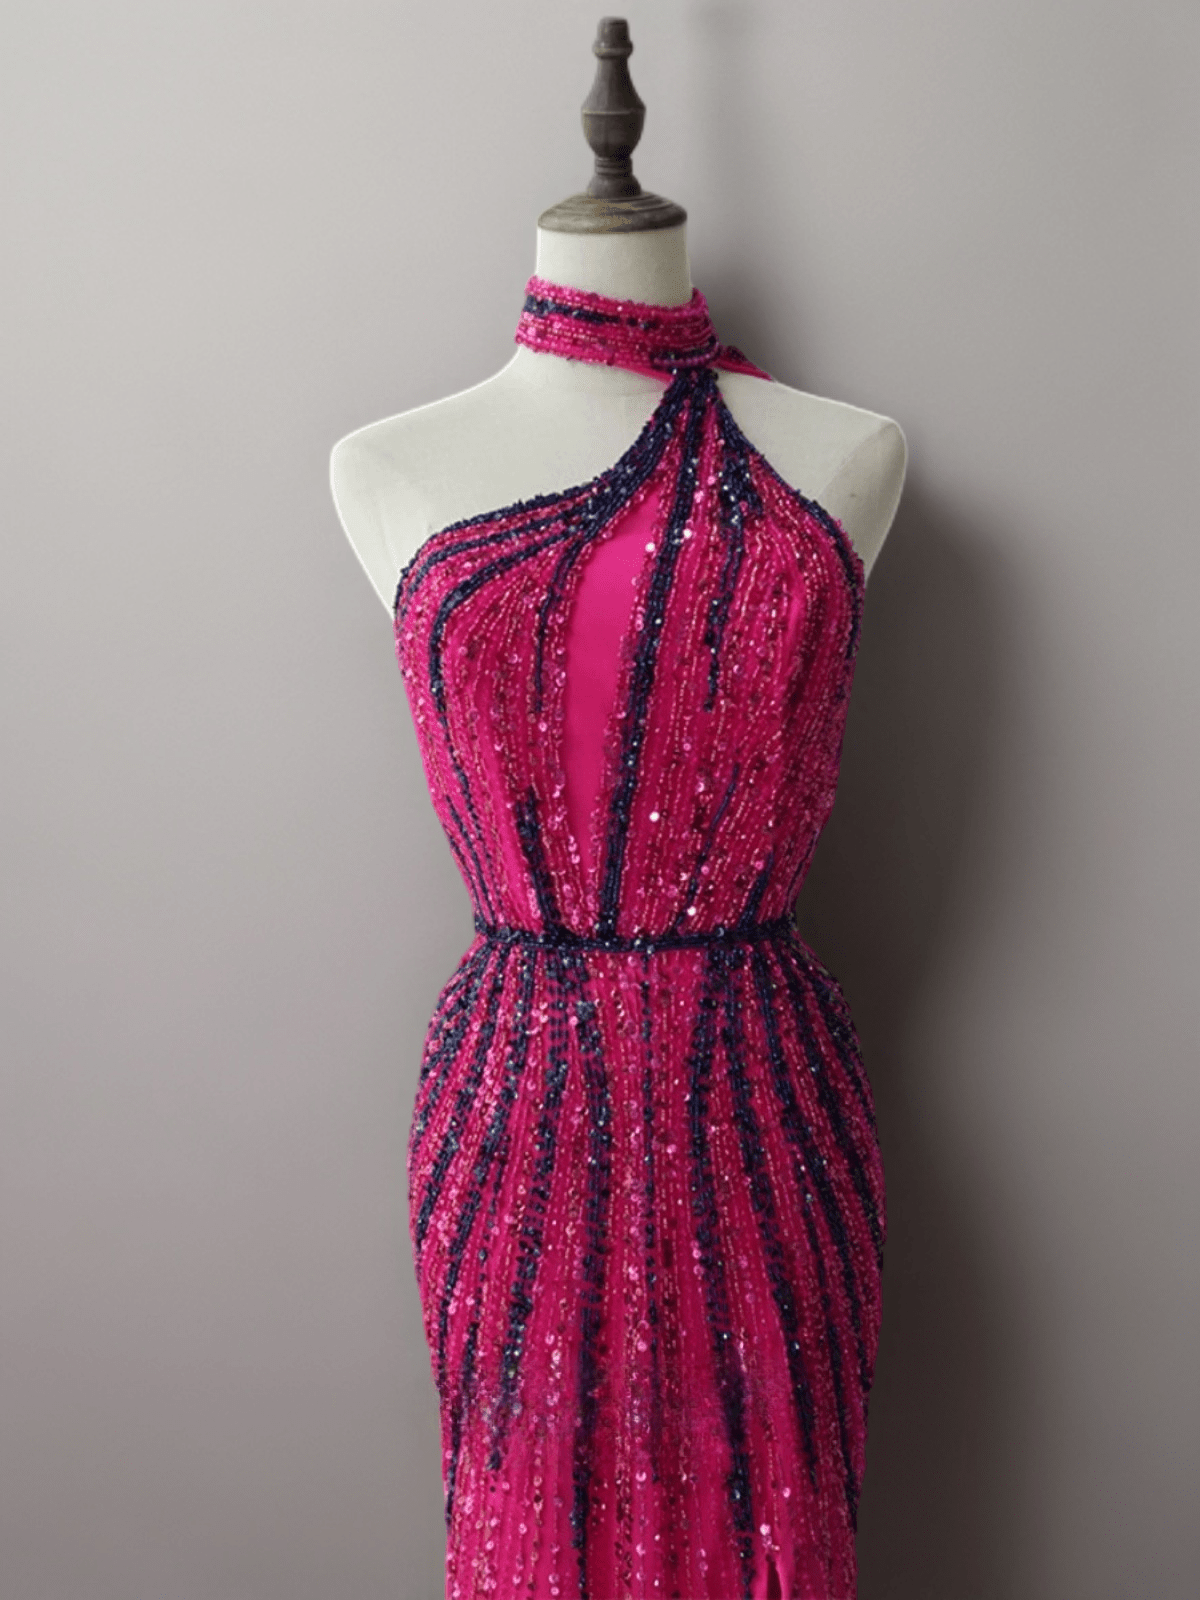 Pink and Navy Sequin Prom Dress and Strapless Glitter Dress - Elegant Pink Sequin Evening Gown Plus Size - WonderlandByLilian